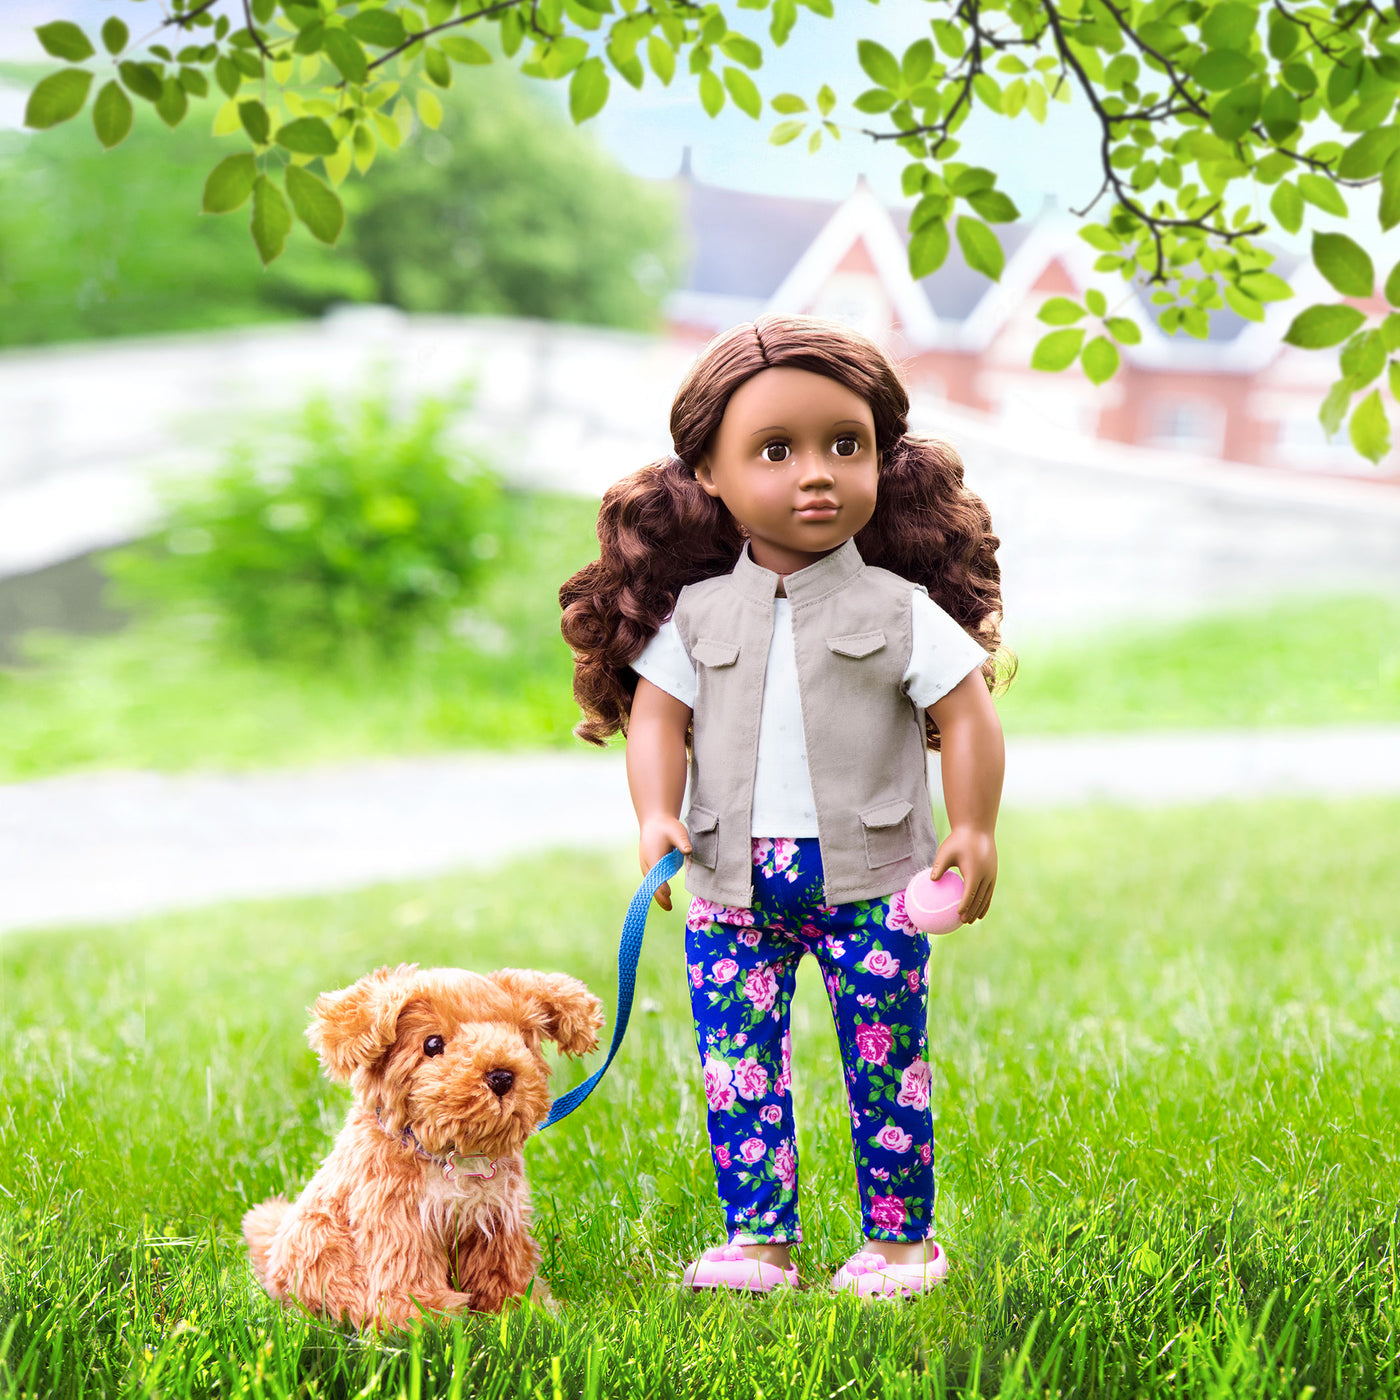 18-inch doll with brown hair and brown eyes walking poodle dog plushie